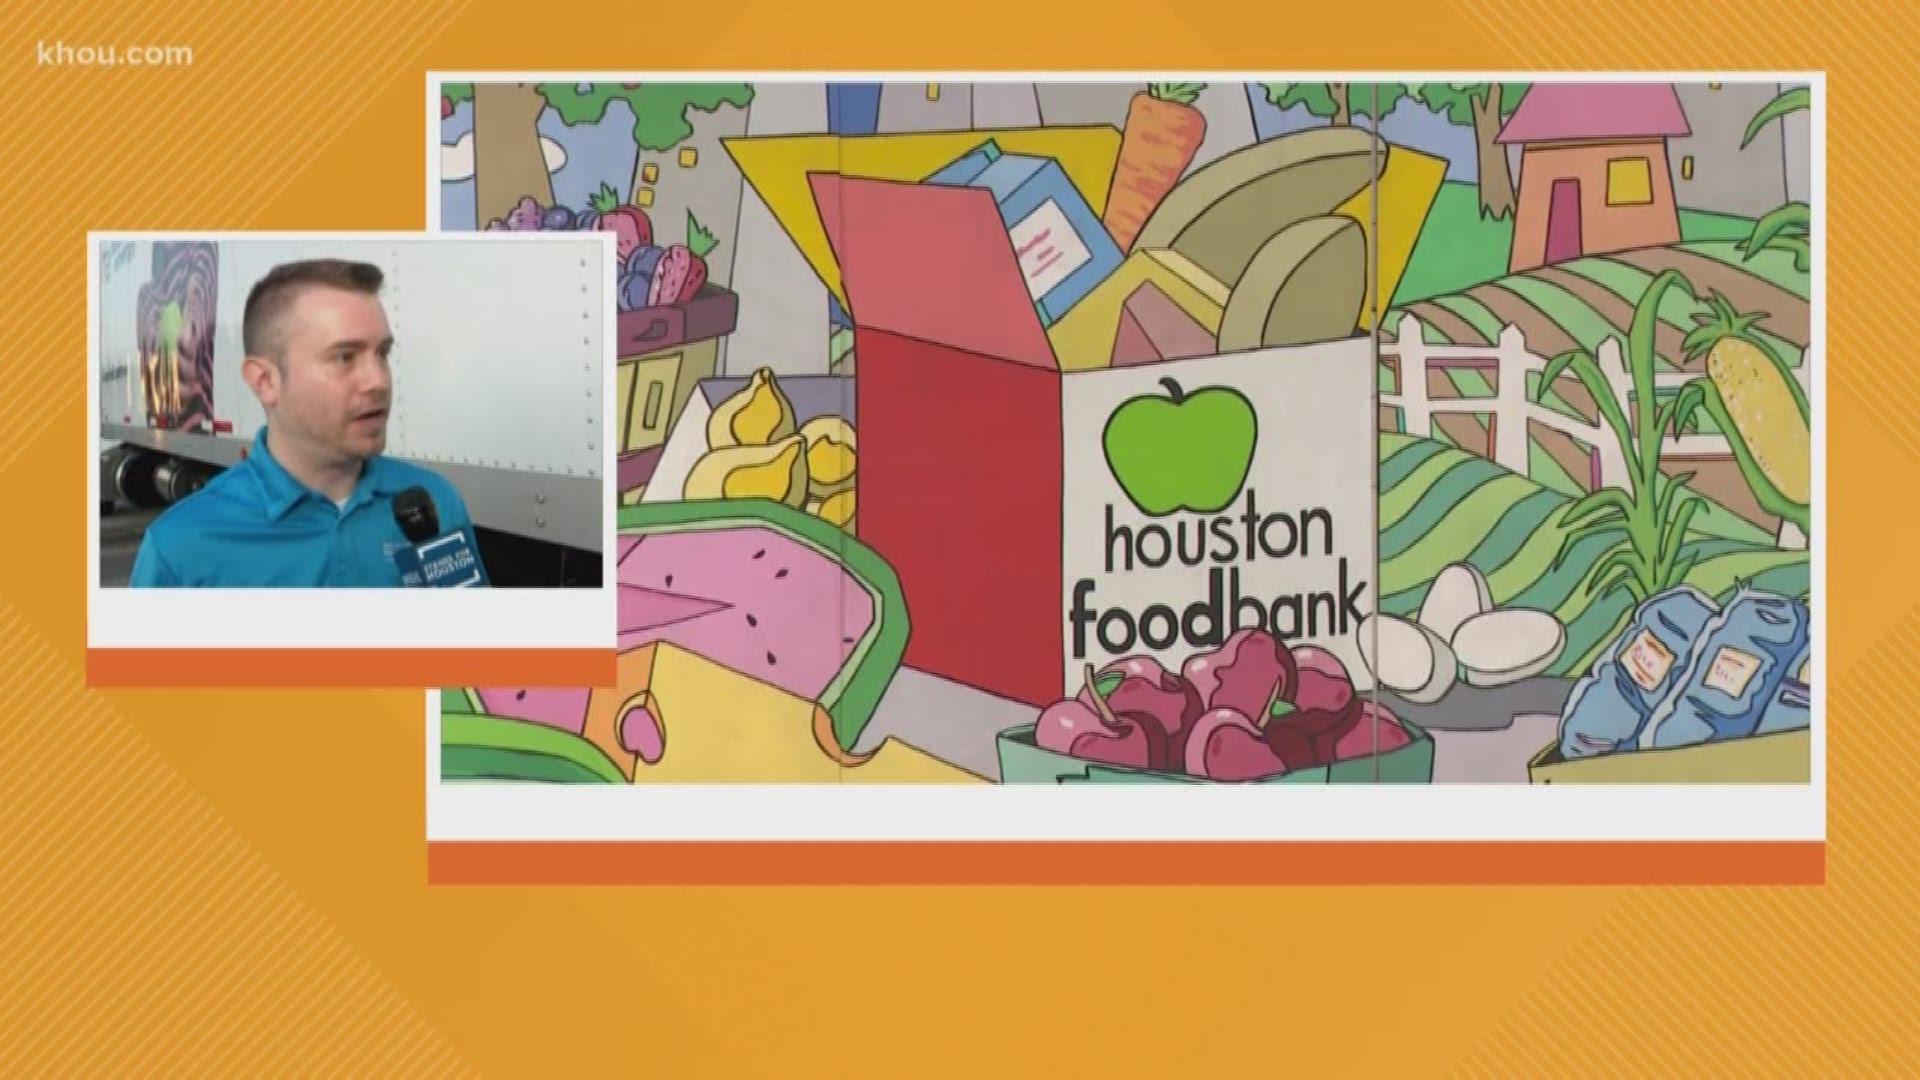 Here at KHOU, we're standing against hunger in Houston, and we need your help. KHOU 11 is joining forces with the Houston Food Bank to collect food and monetary donations. The goal is to provide 125,000 meals for Houston-area children.